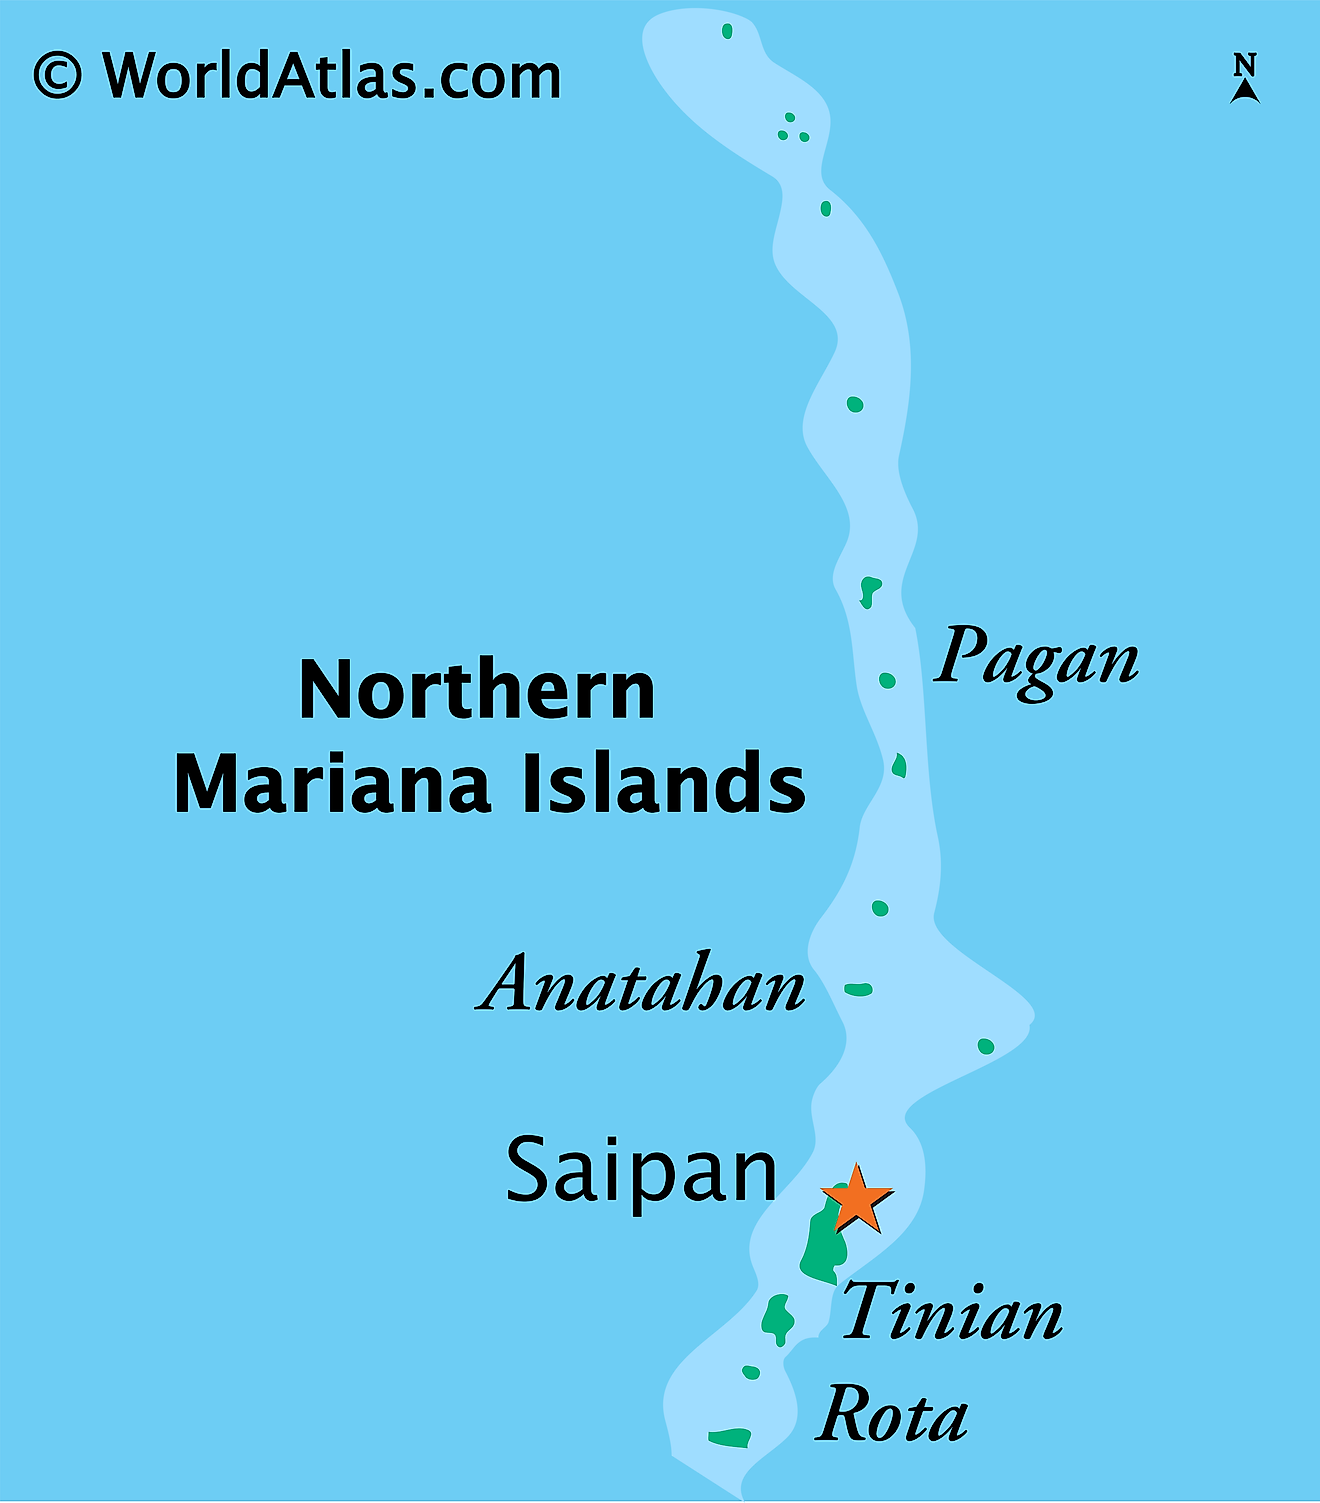 Maps and facts of the Northern Mariana Islands